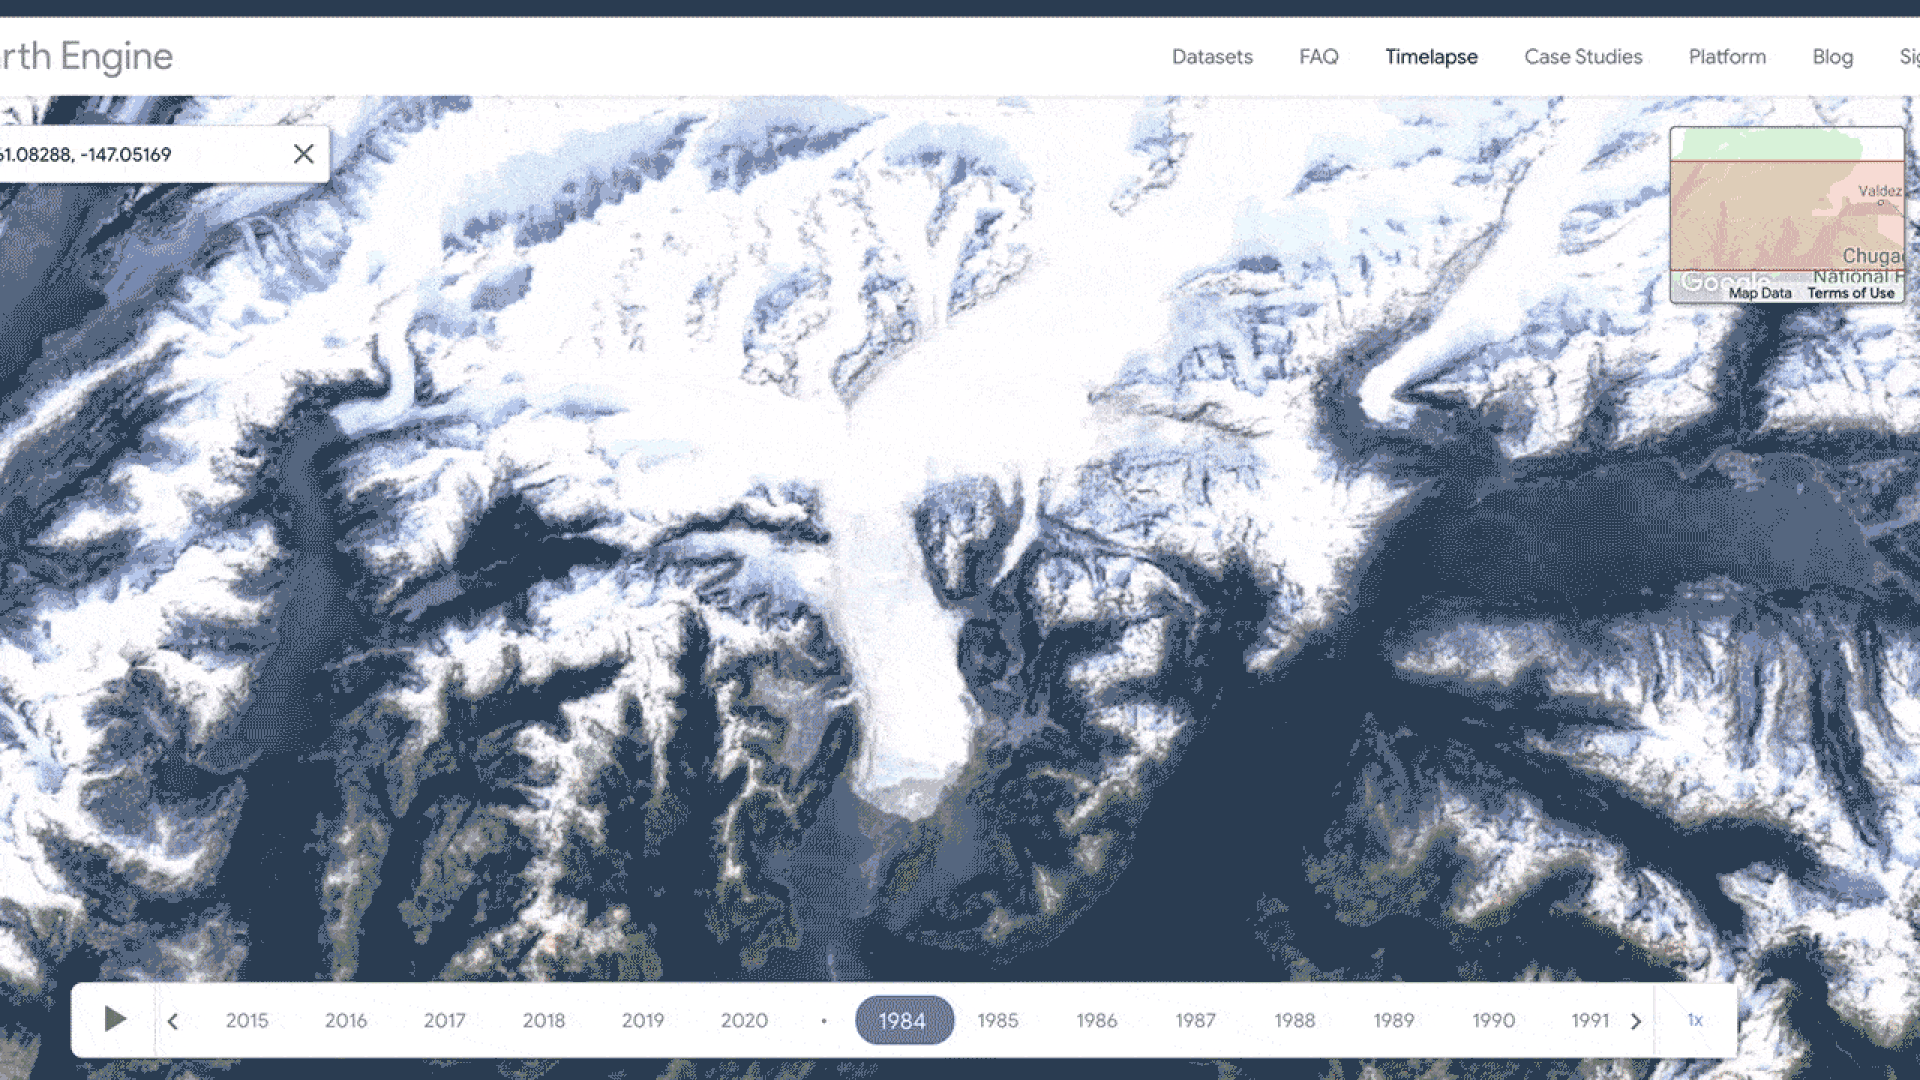 Satellite imagery showing a glacier getting smaller over time.